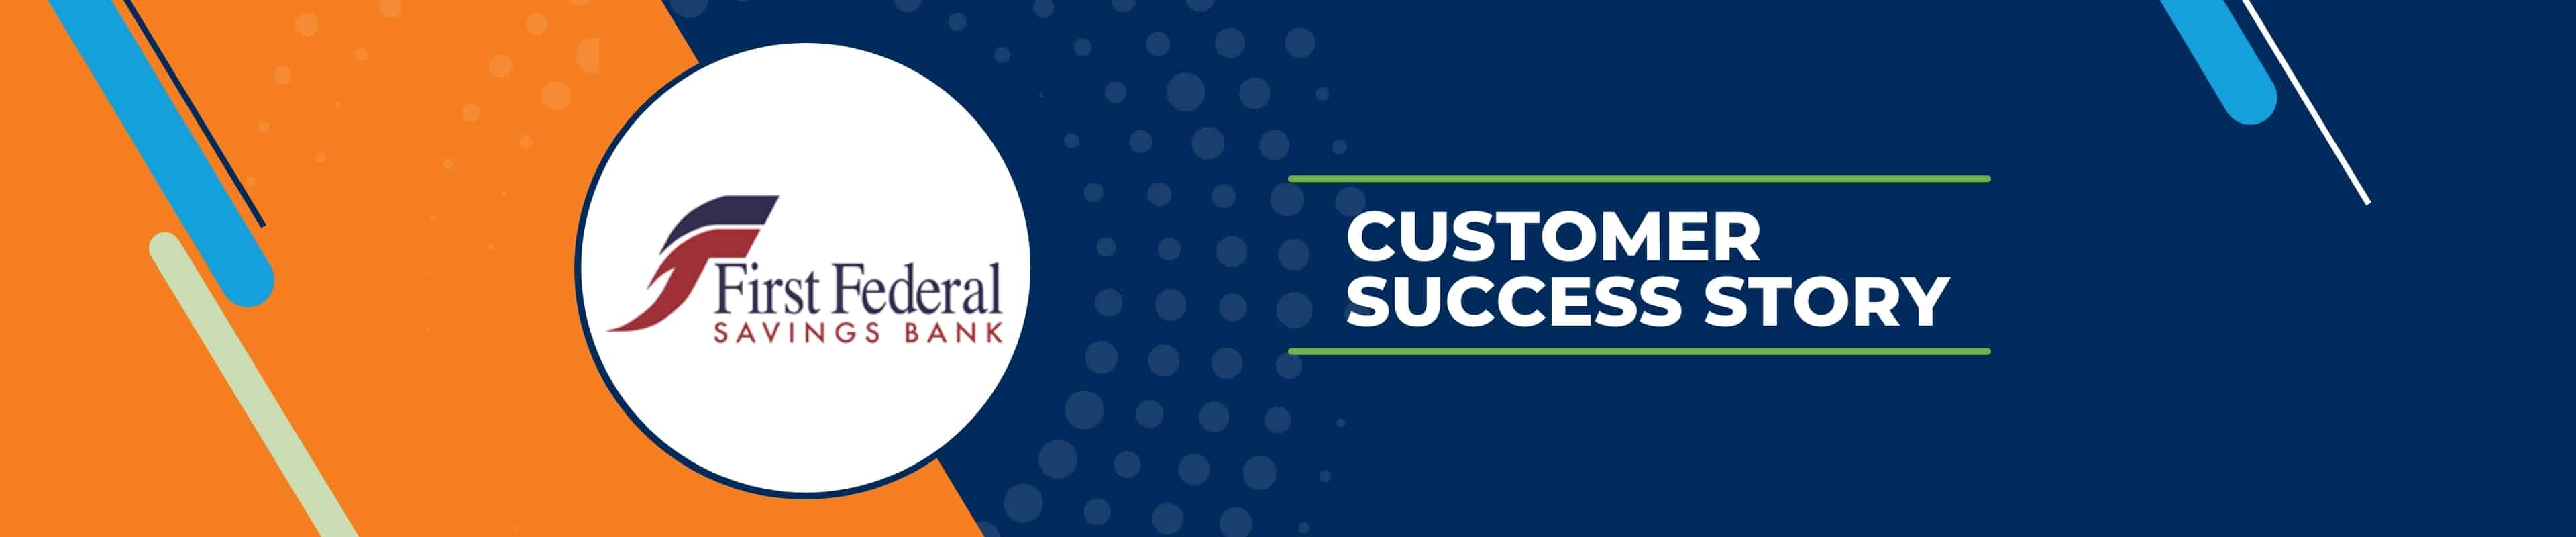 First Federal Customer Success Story